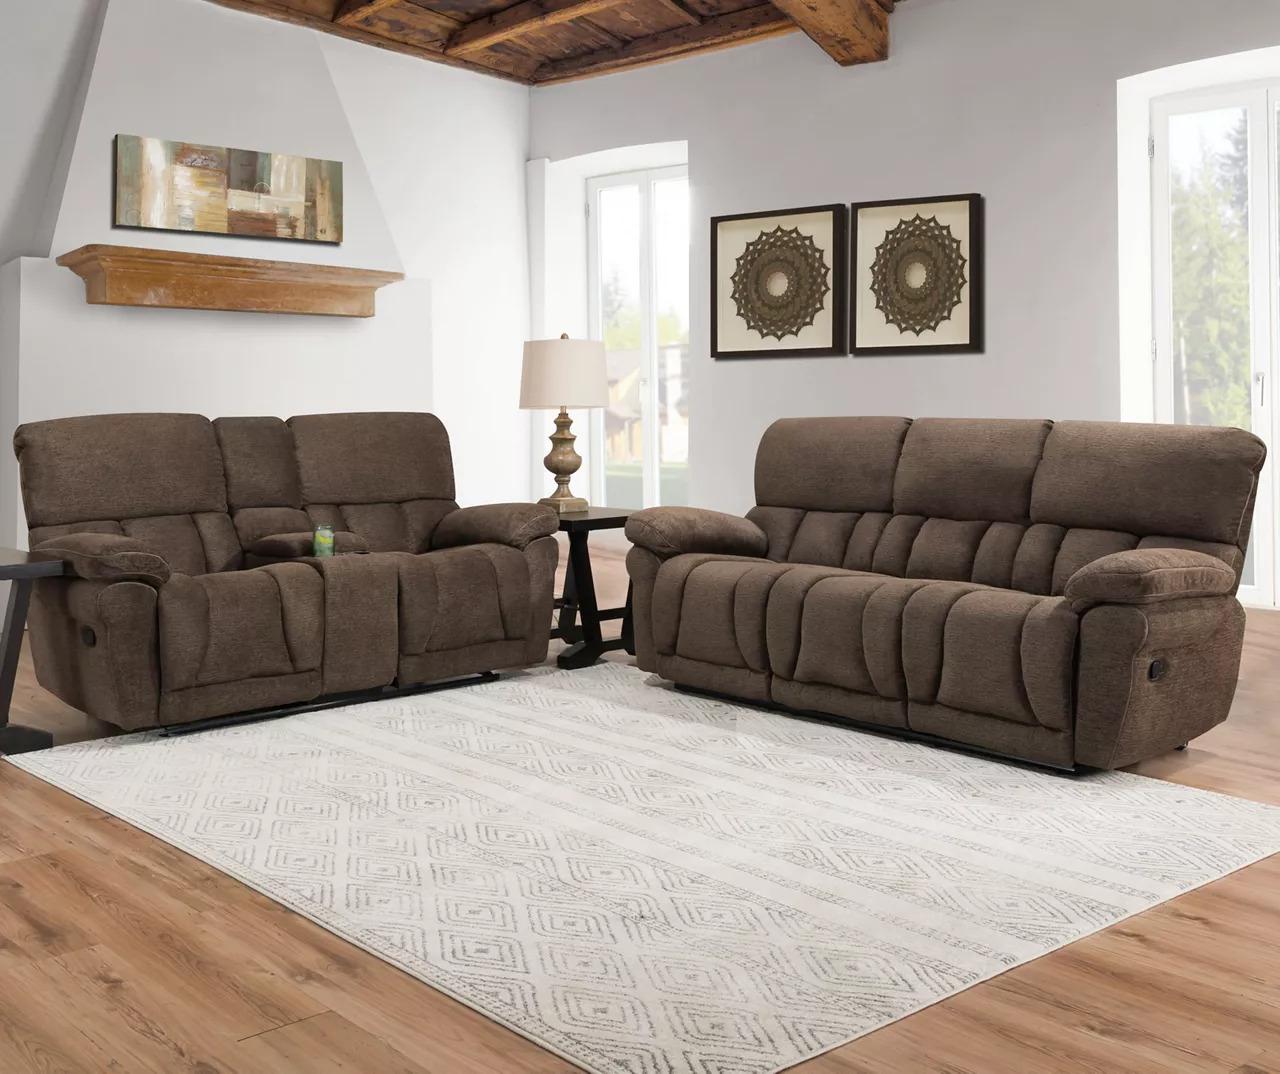 <Zac Dual Reclining Sofa and Dual Reclining Love Seat with Storage Console - Brown